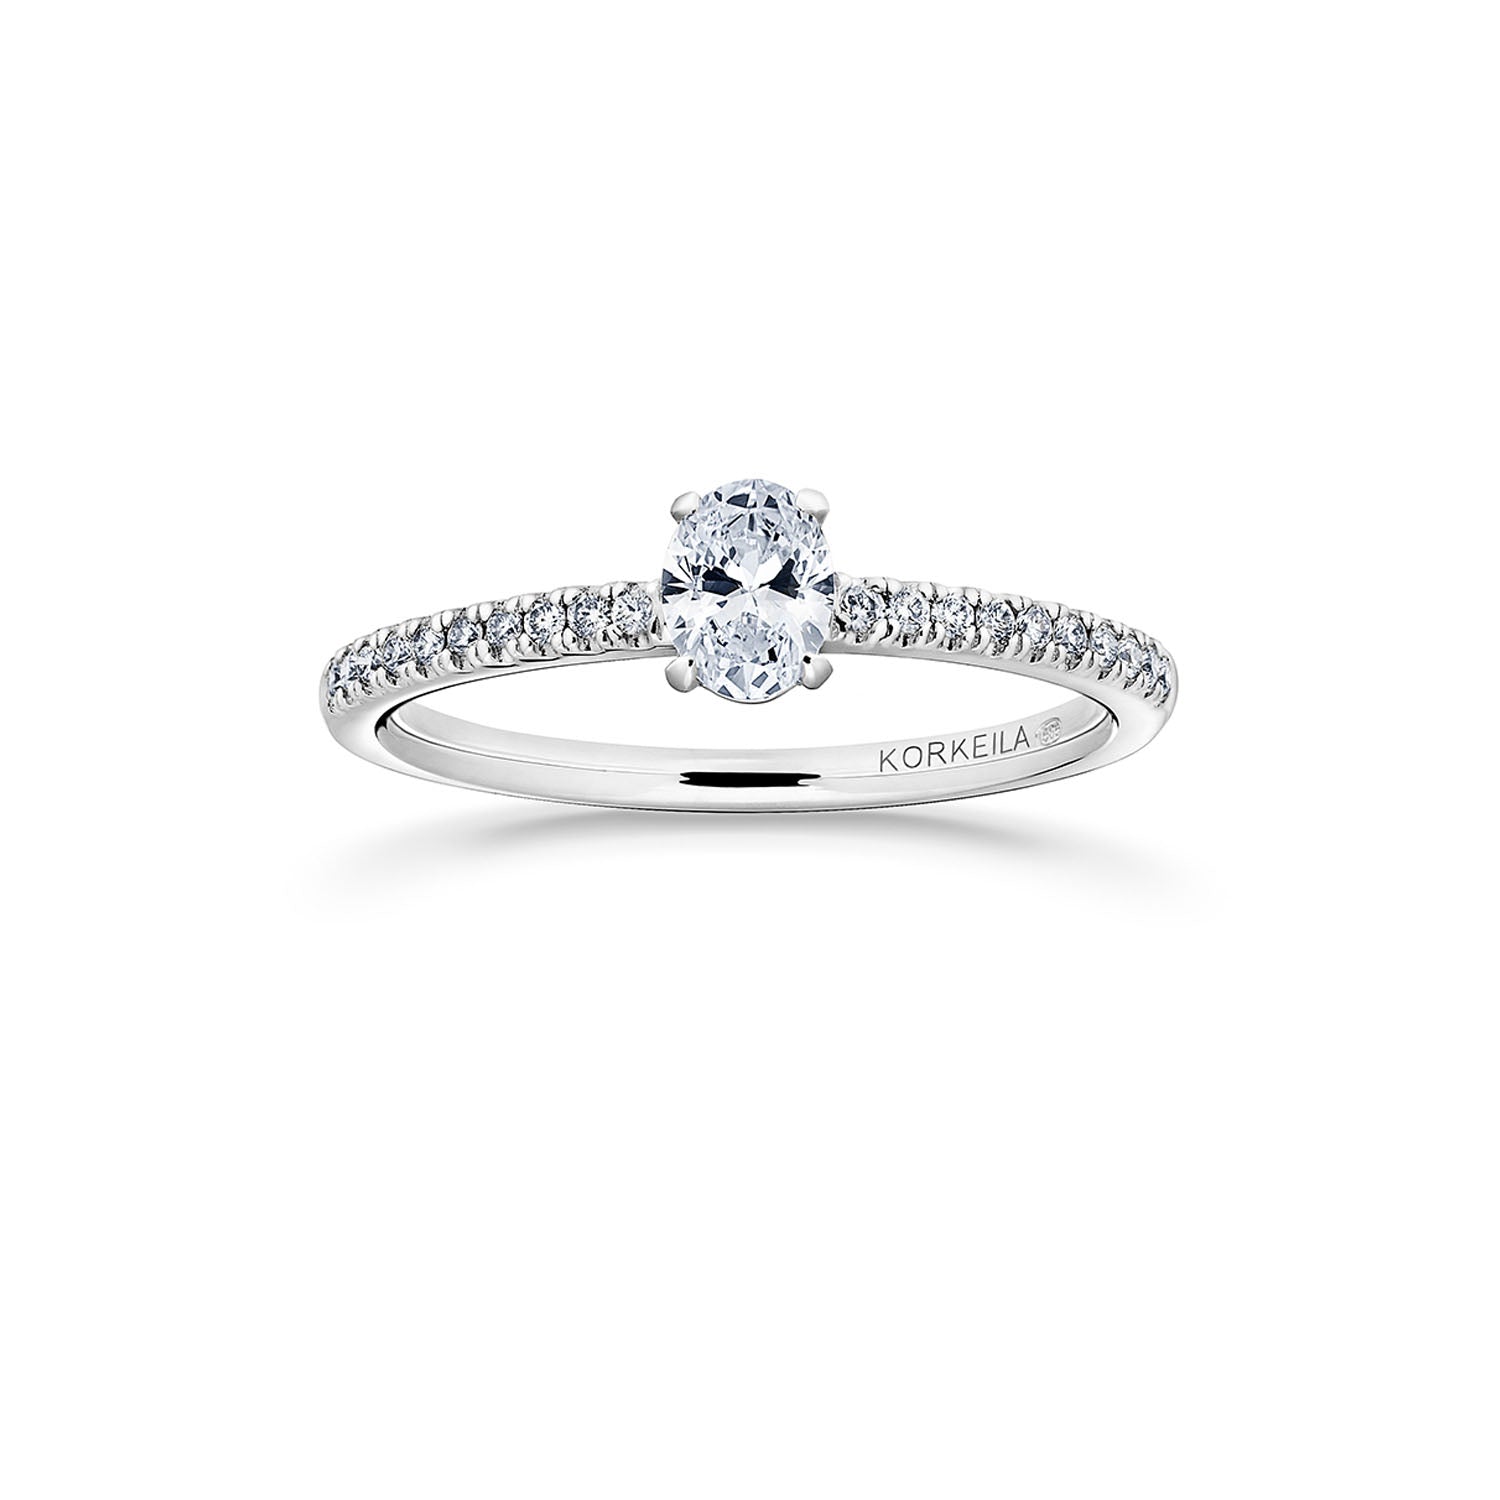 Siro Collection | Engagement and Wedding rings